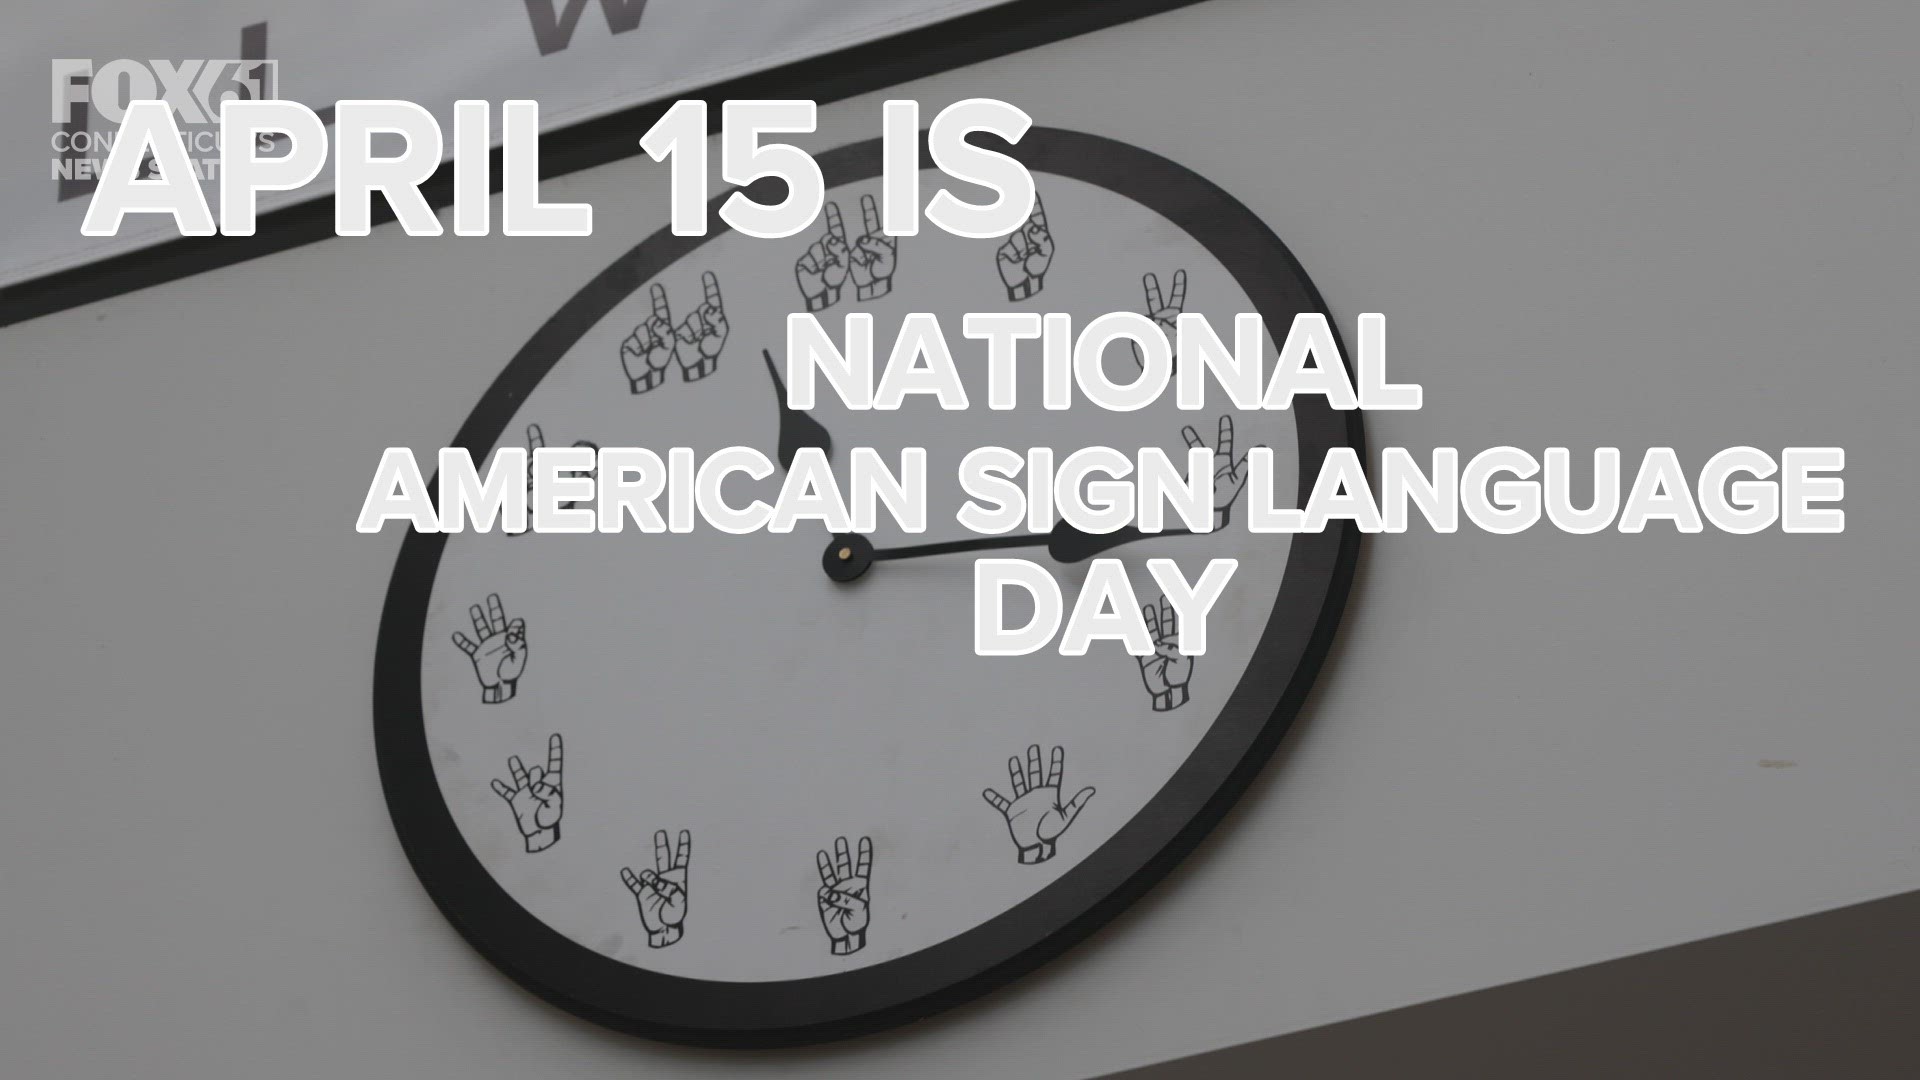 A look at where National American Sign Language Day happens daily